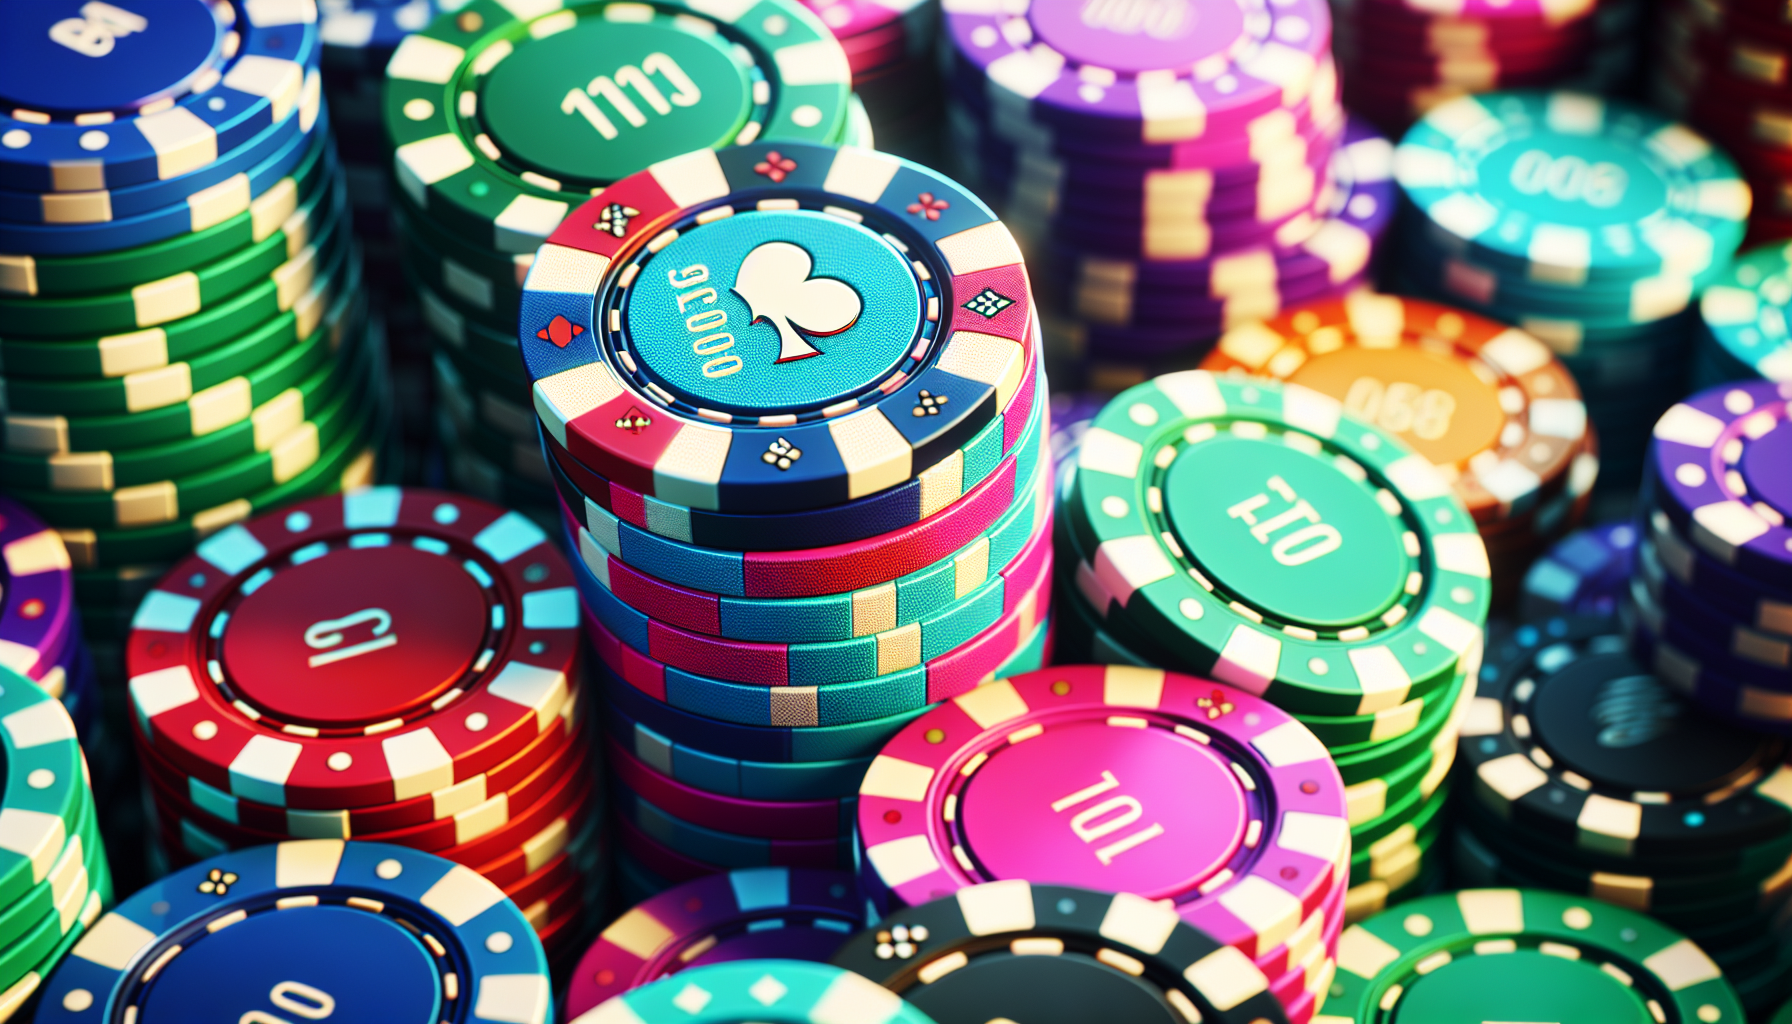 Who Made The Most Money From Gambling?